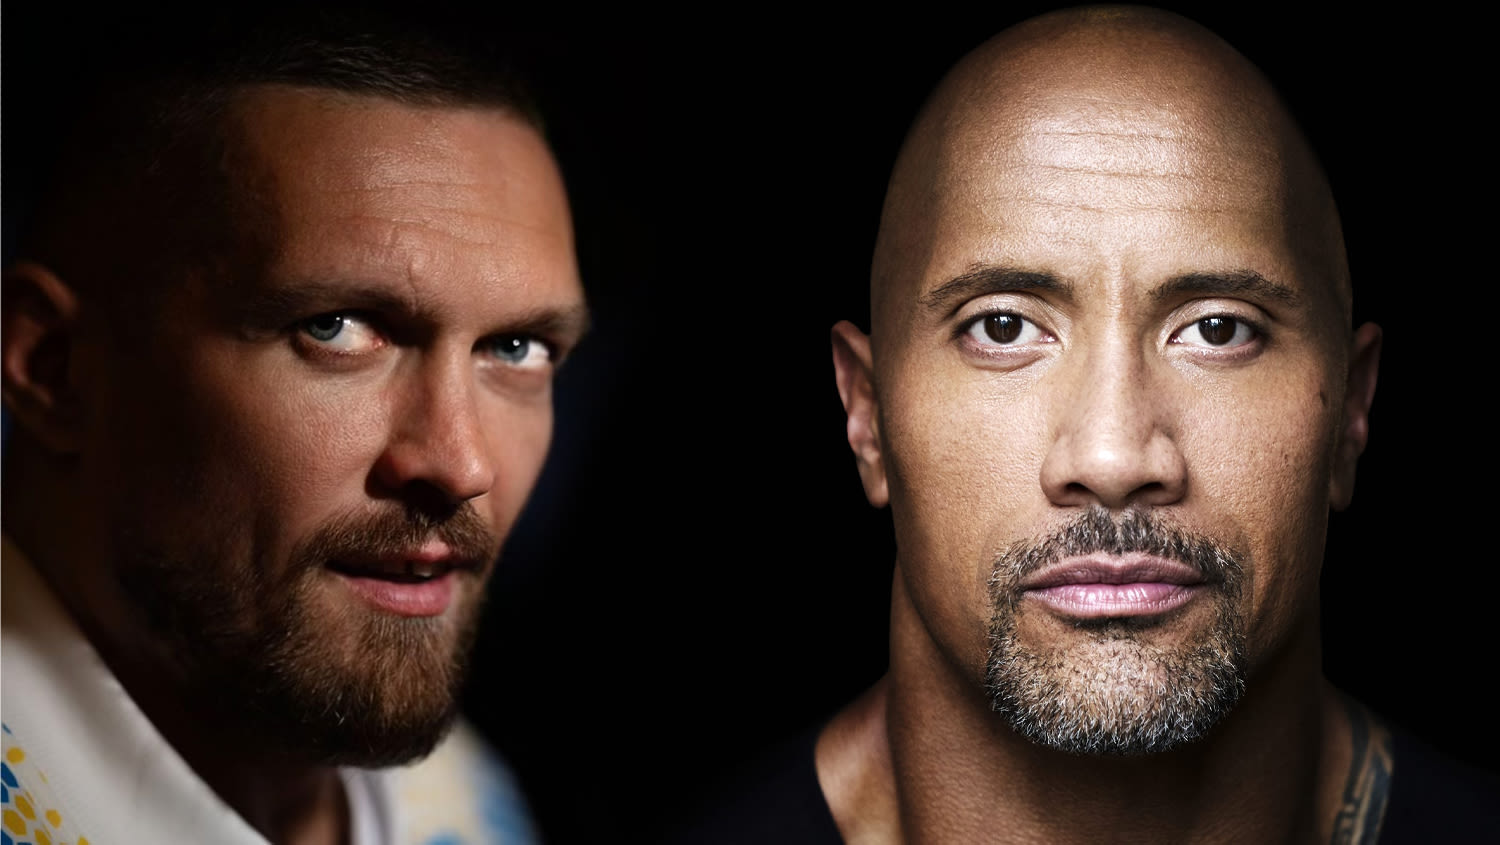 Undisputed Heavyweight Champion Boxer Oleksandr Usyk Joins Dwayne Johnson In ‘The Smashing Machine’ From A24 And...